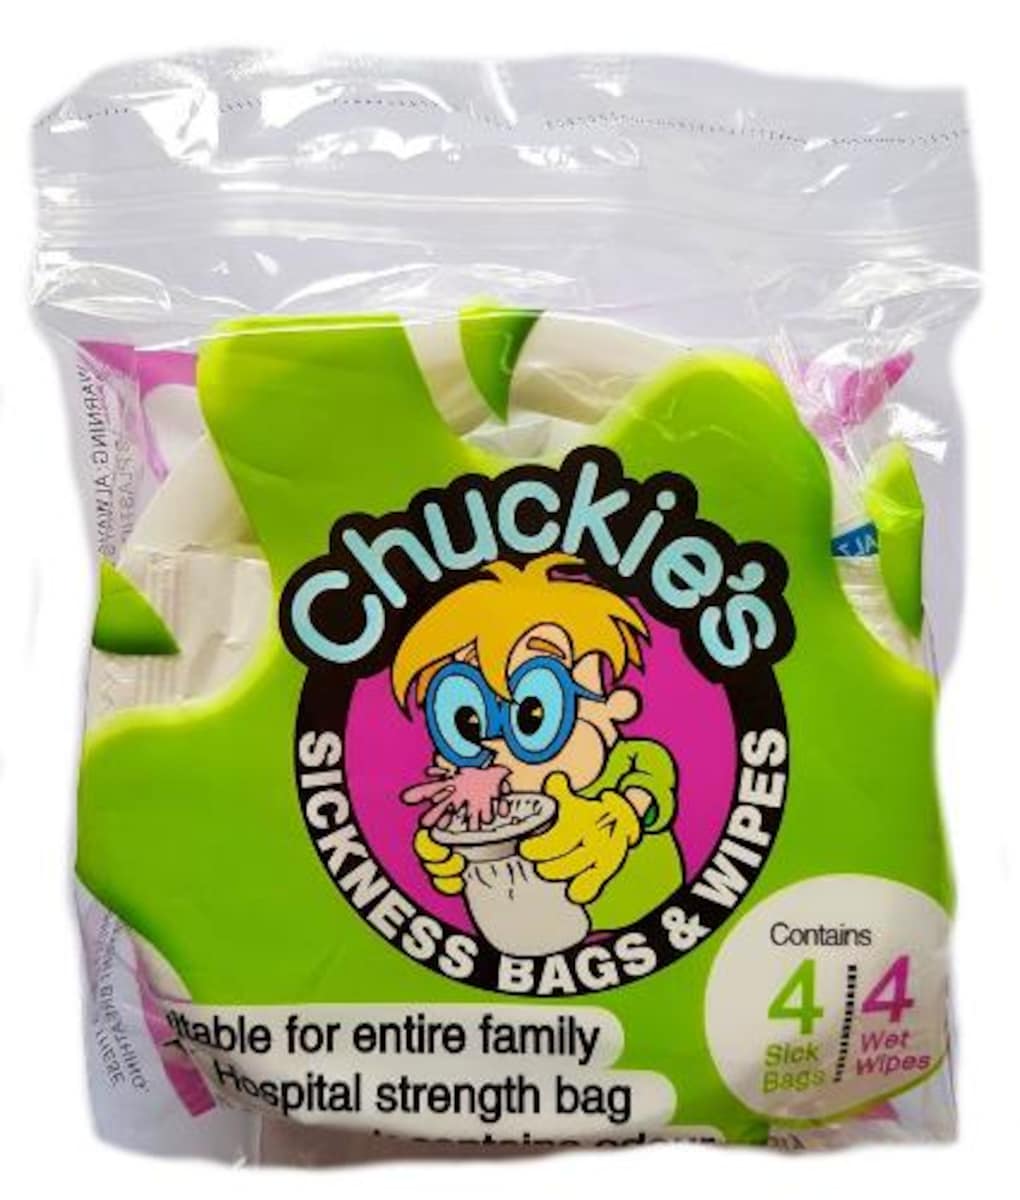 Chuckies Vomit Bags includes 4 Vomit Bags & 4 Wet Wipes